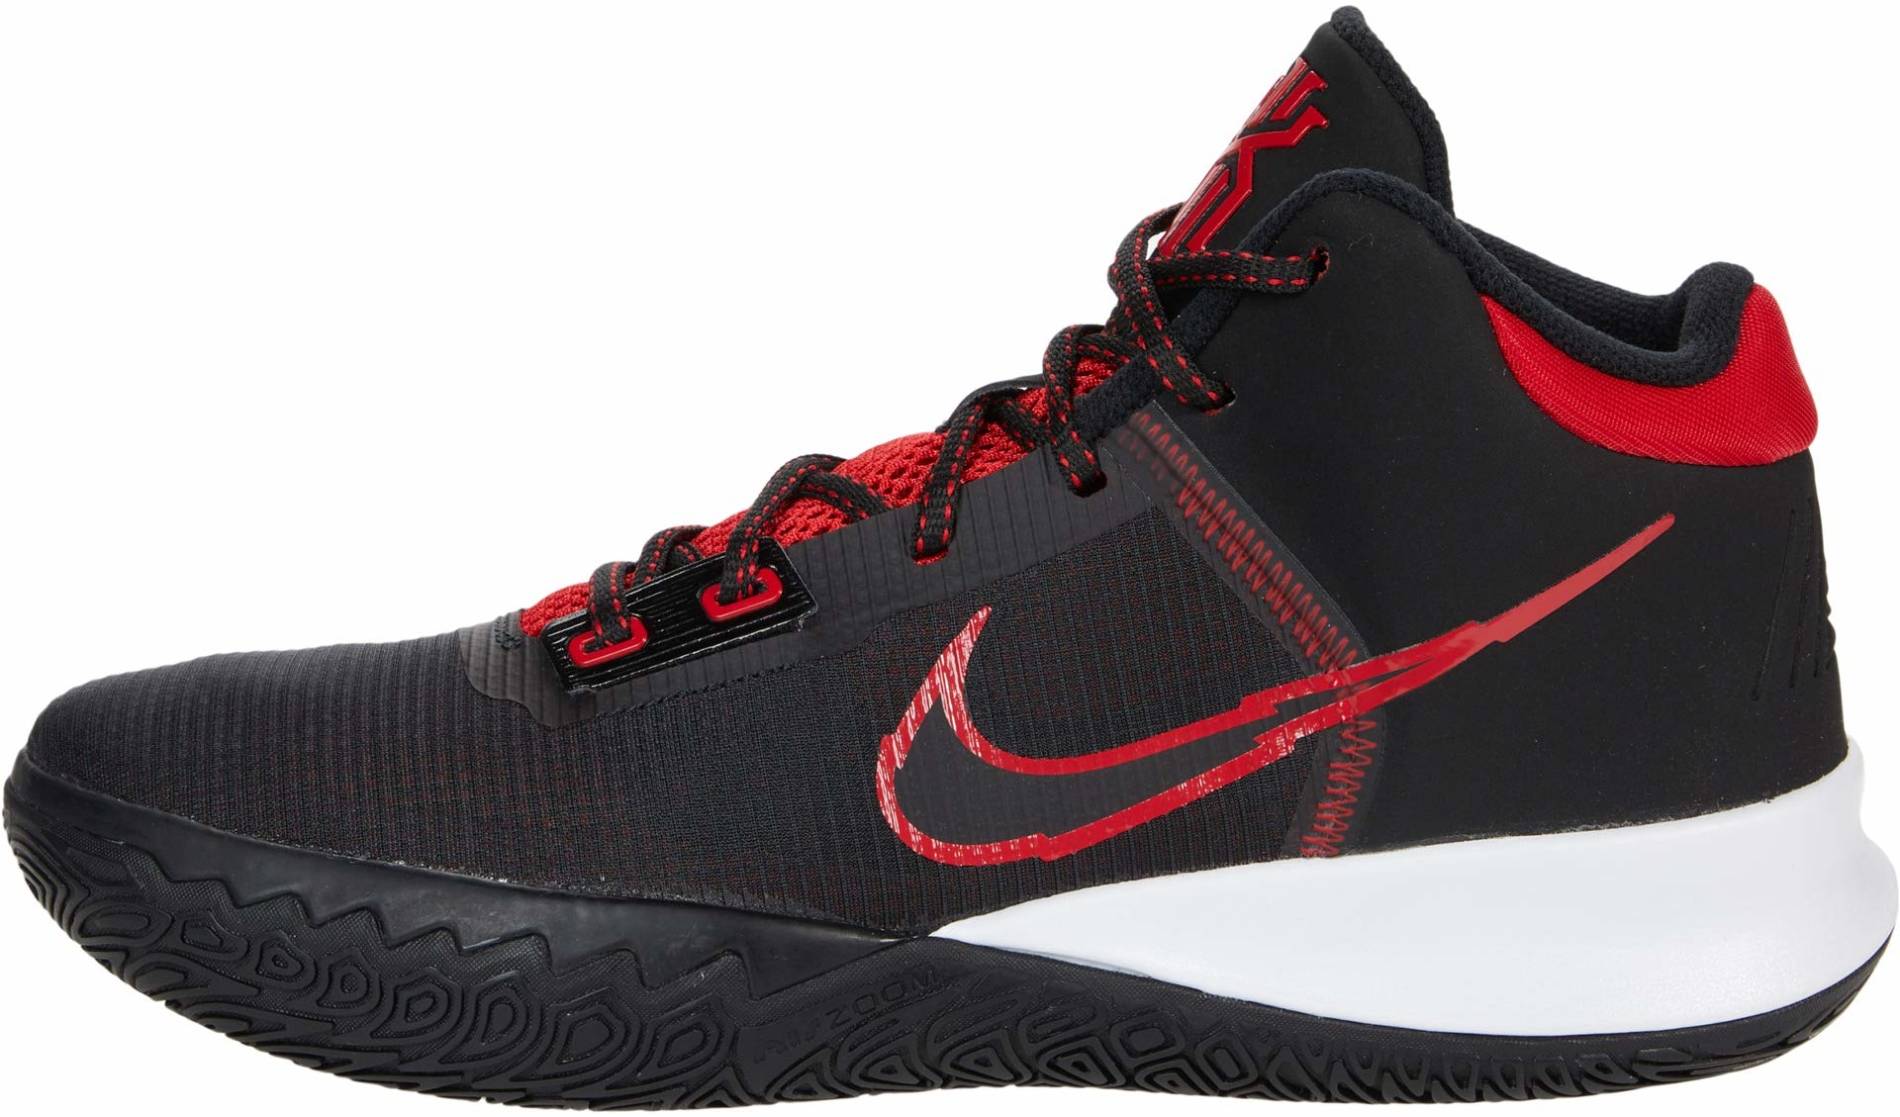 kyrie irving shoes red and black